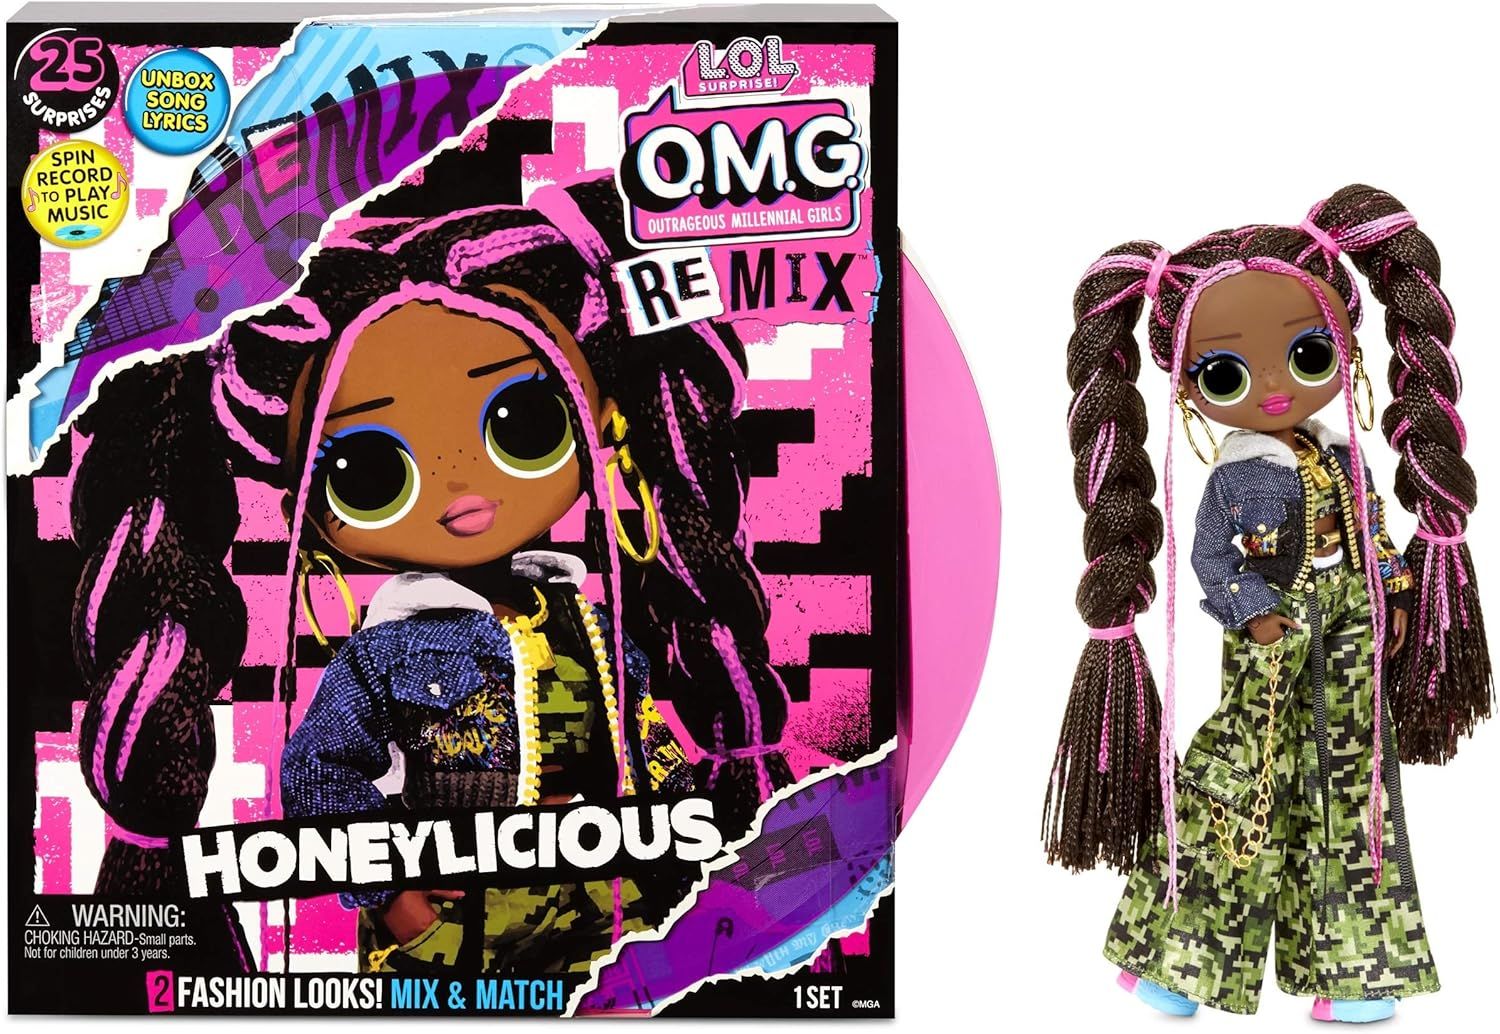 LOL Surprise OMG Remix Honeylicious Fashion Doll, Plays Music with 25 Surprises Including Shoes, ... | Amazon (US)